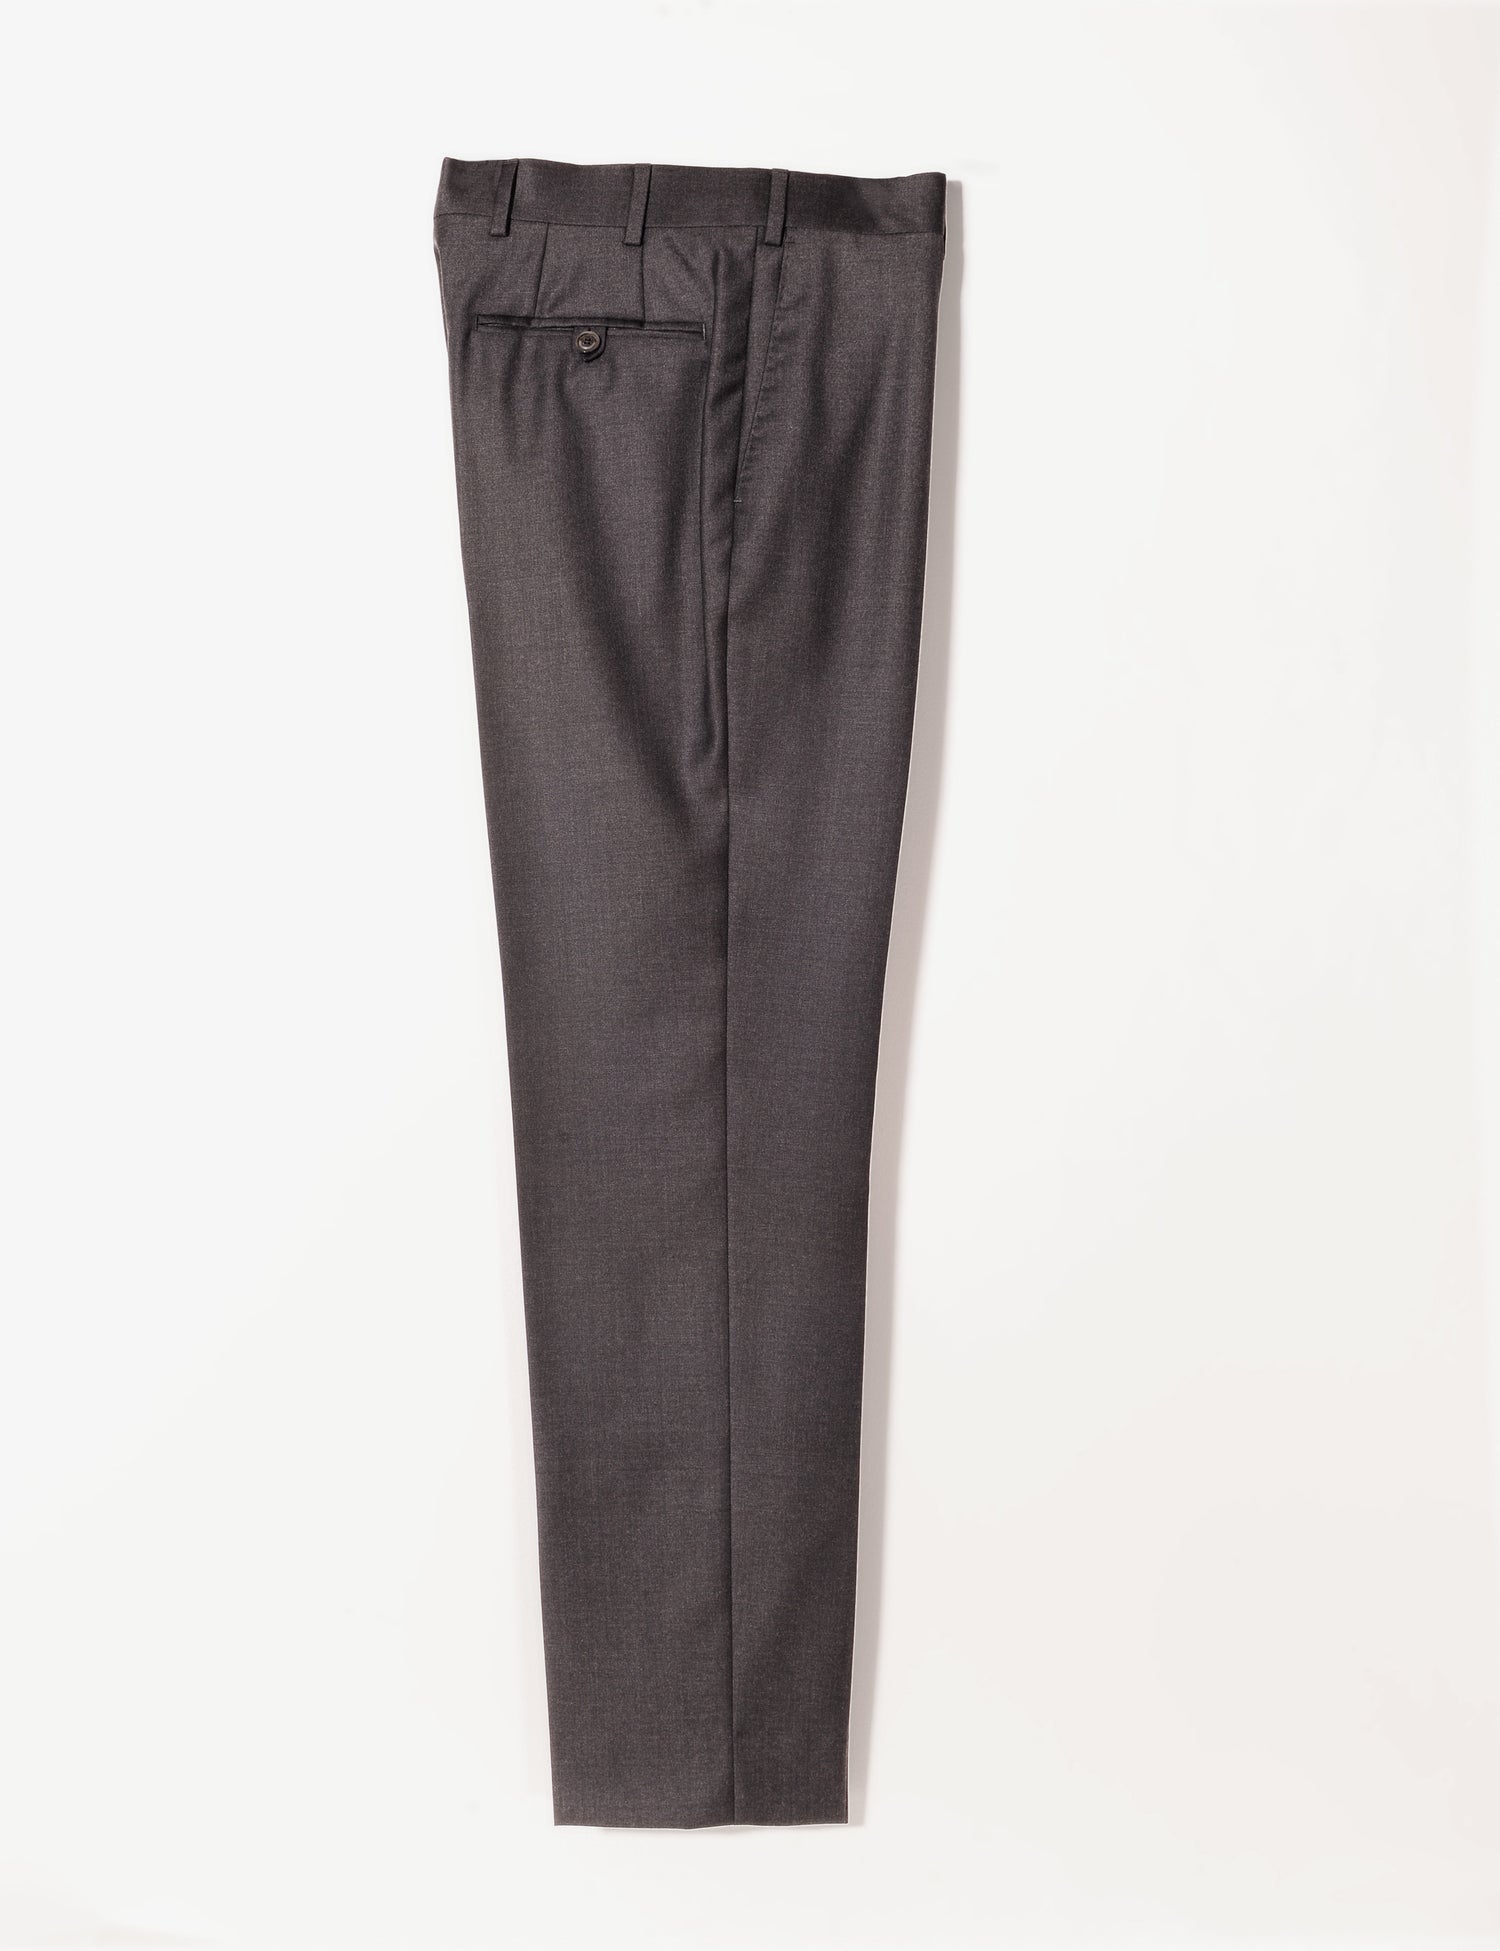 Brooklyn Tailors BKT50 Tailored Trouser in Super 110s Twill - Charcoal full length flat shot